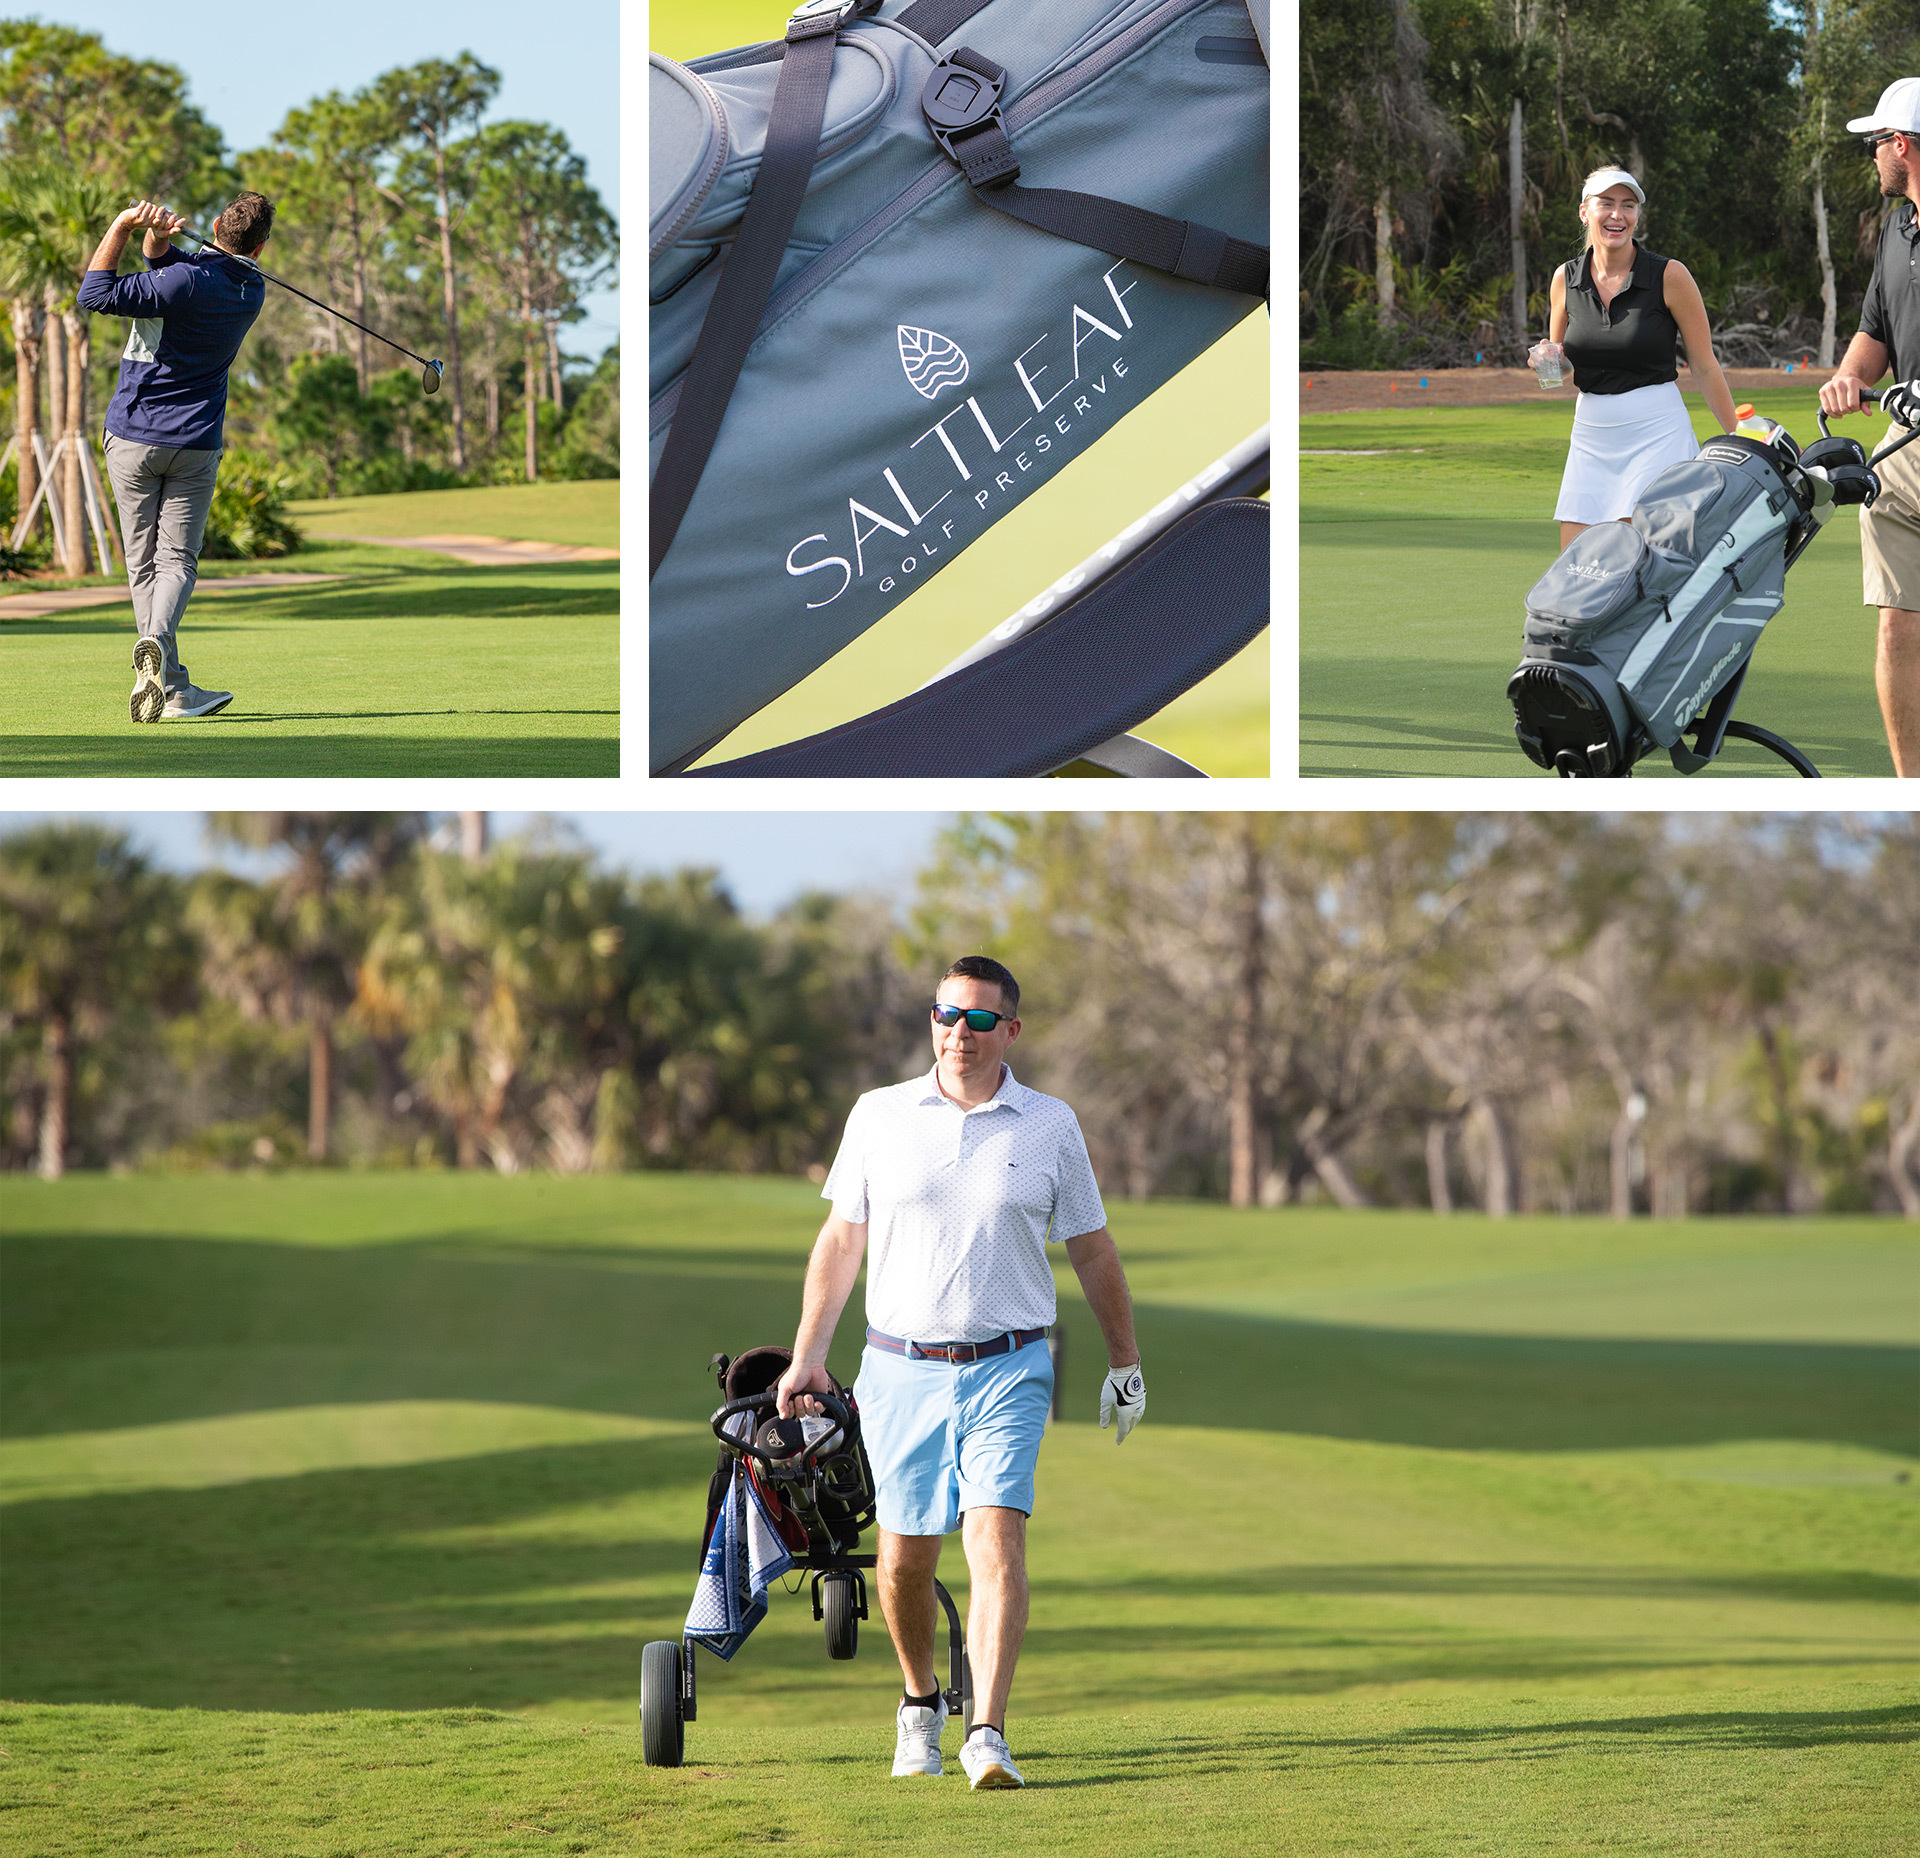 A collage of golf-related images, featuring a golfer swinging a club, a close-up of a golf bag with a logo, and two golfers walking on a course.